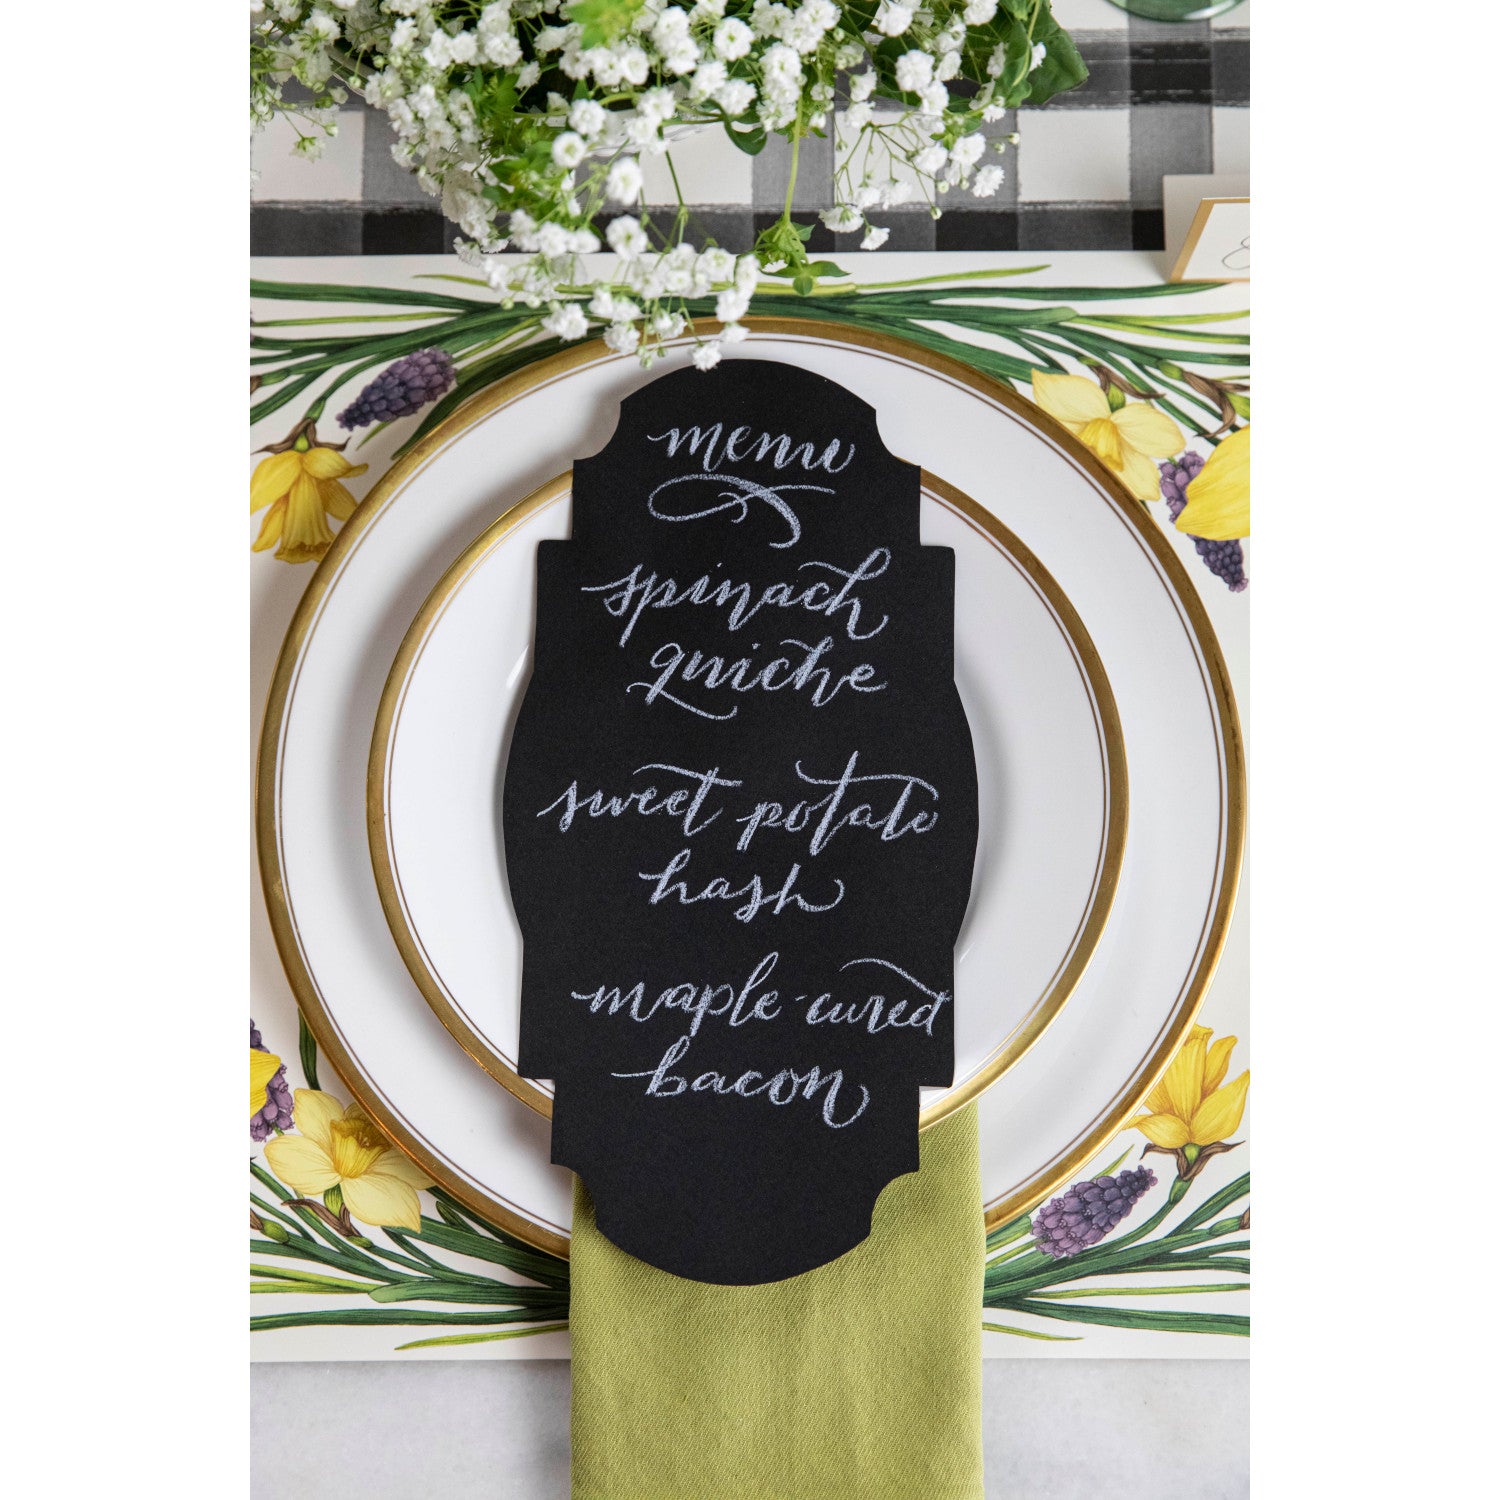 Top-down view of an elegant place setting featuring a Black Frame Table Accent resting on the plate with a menu hand-written in white script.